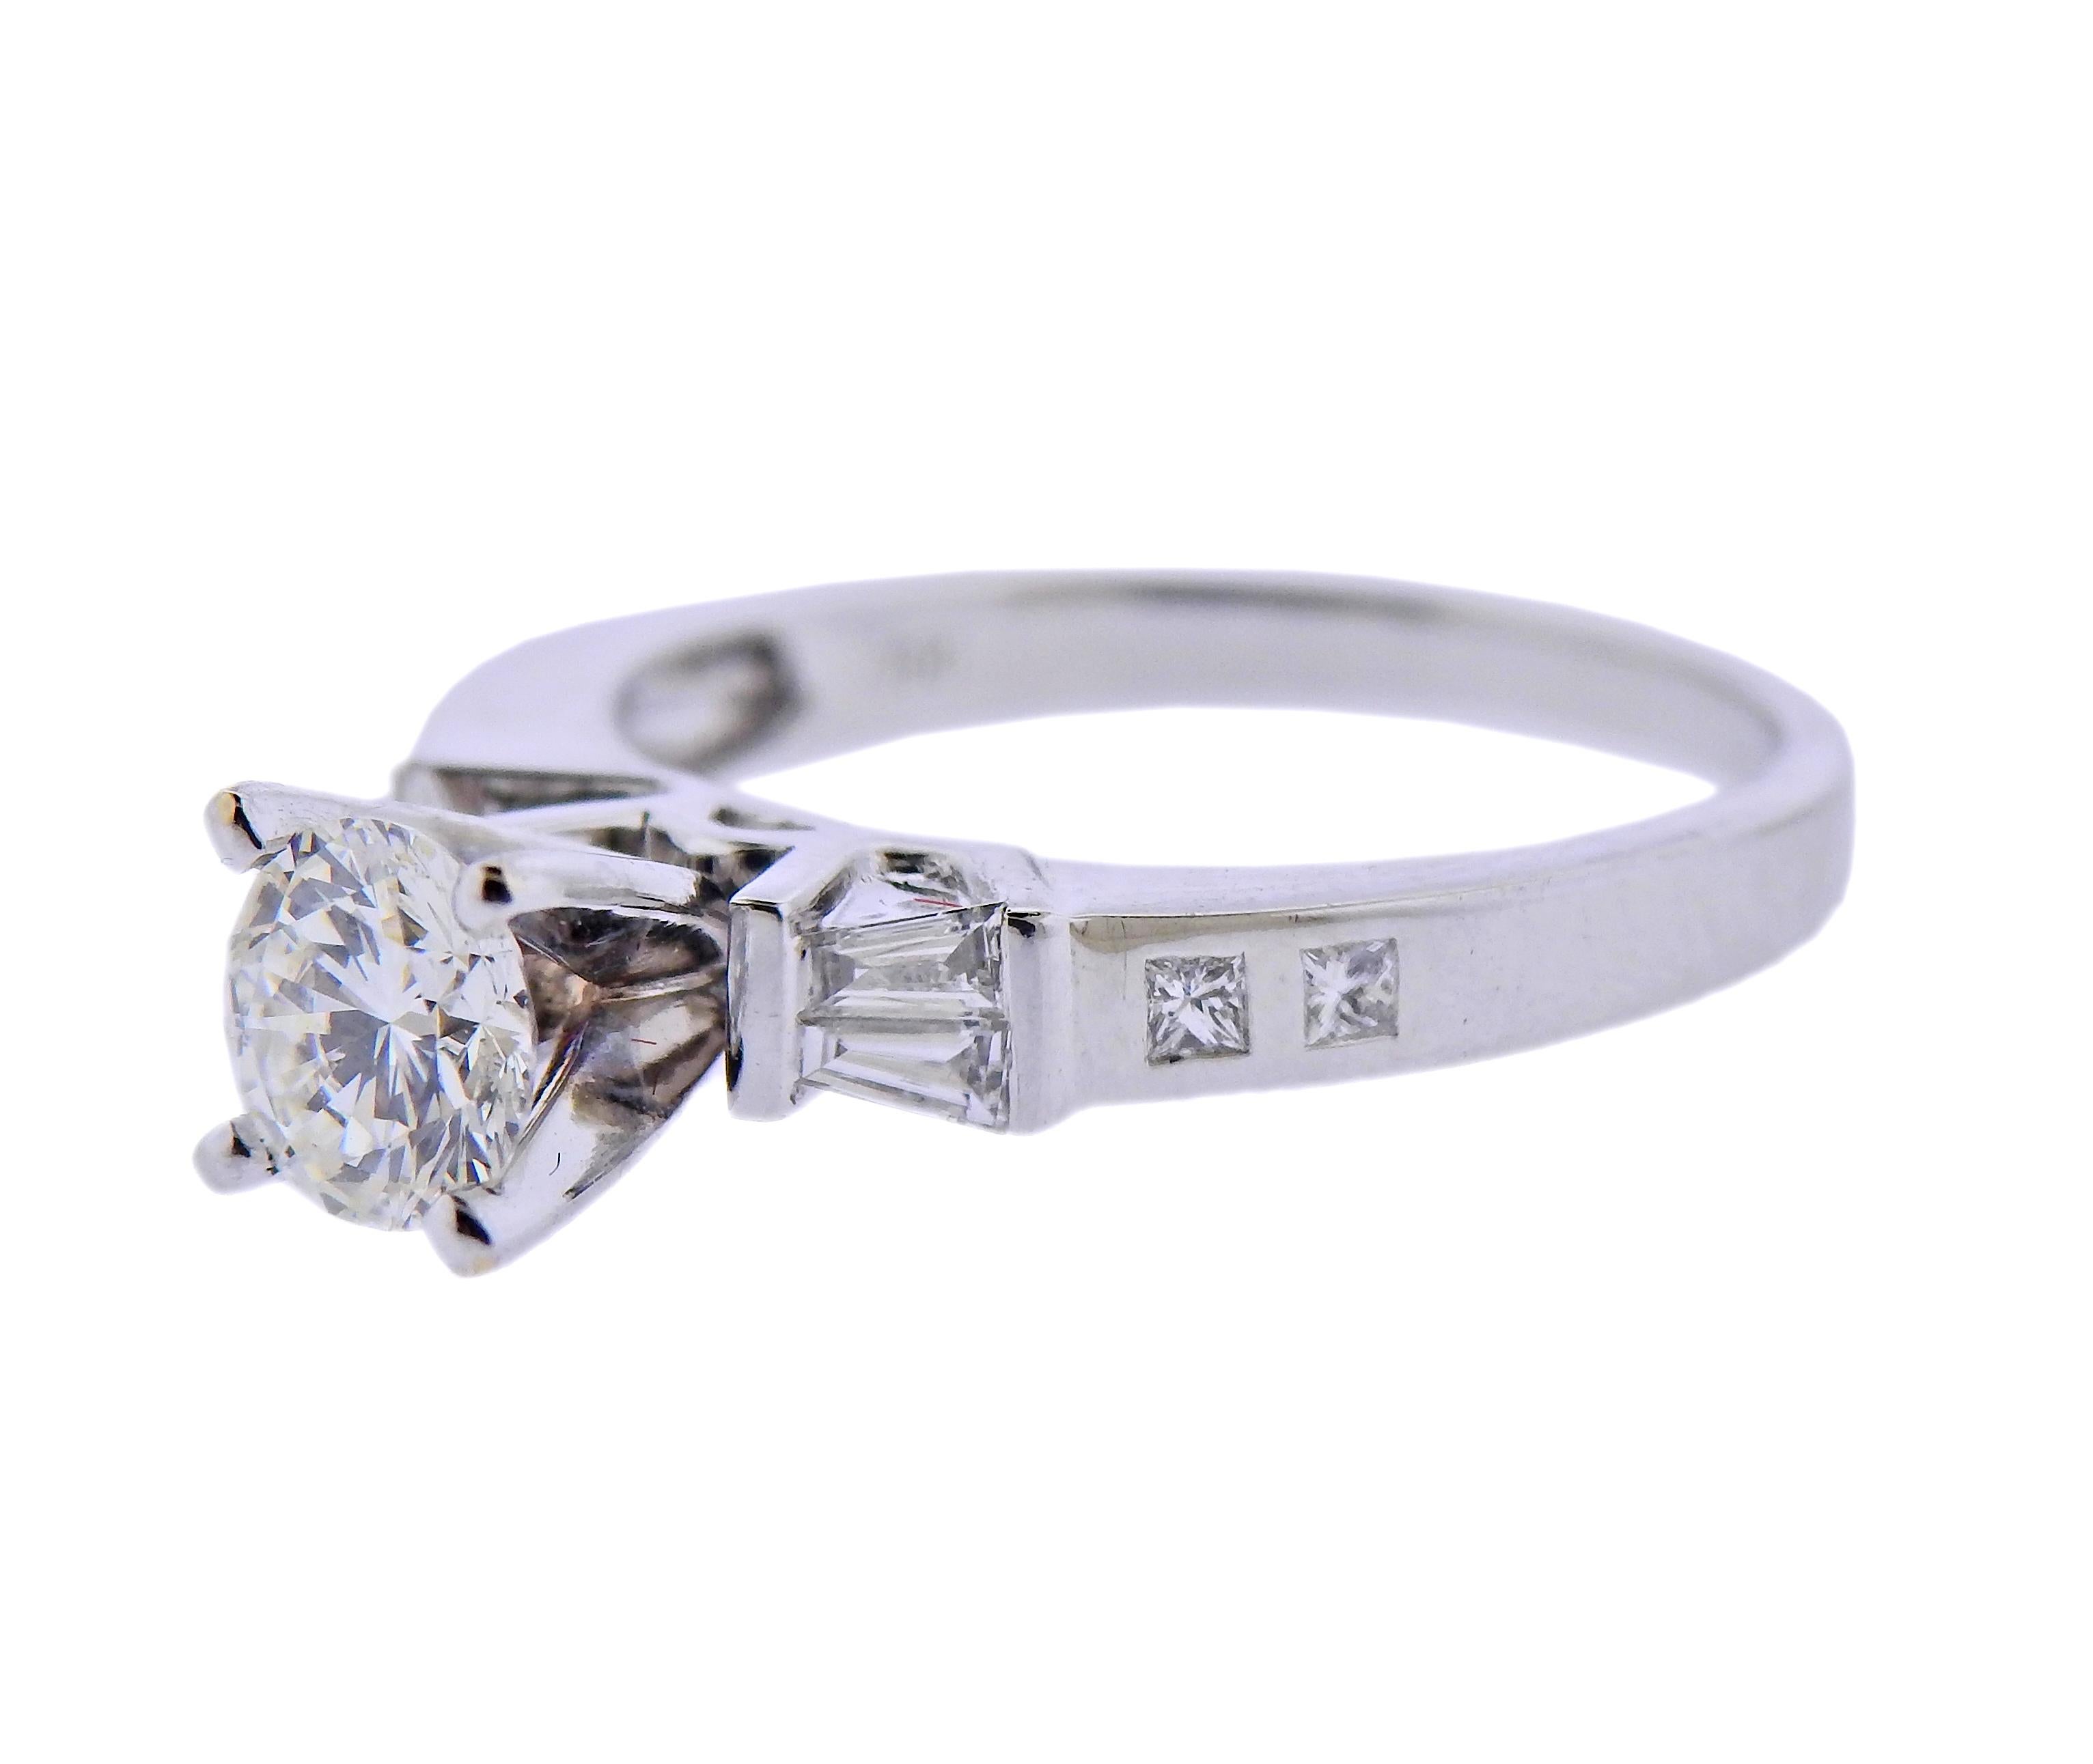 18k white gold engagement ring, with center approx. 0.65ct H-I/VS1-VS2 diamond, and 0.24cts in side diamonds. Ring size - 5.5. Marked: D024, 750. Weight - 3.6 grams. 